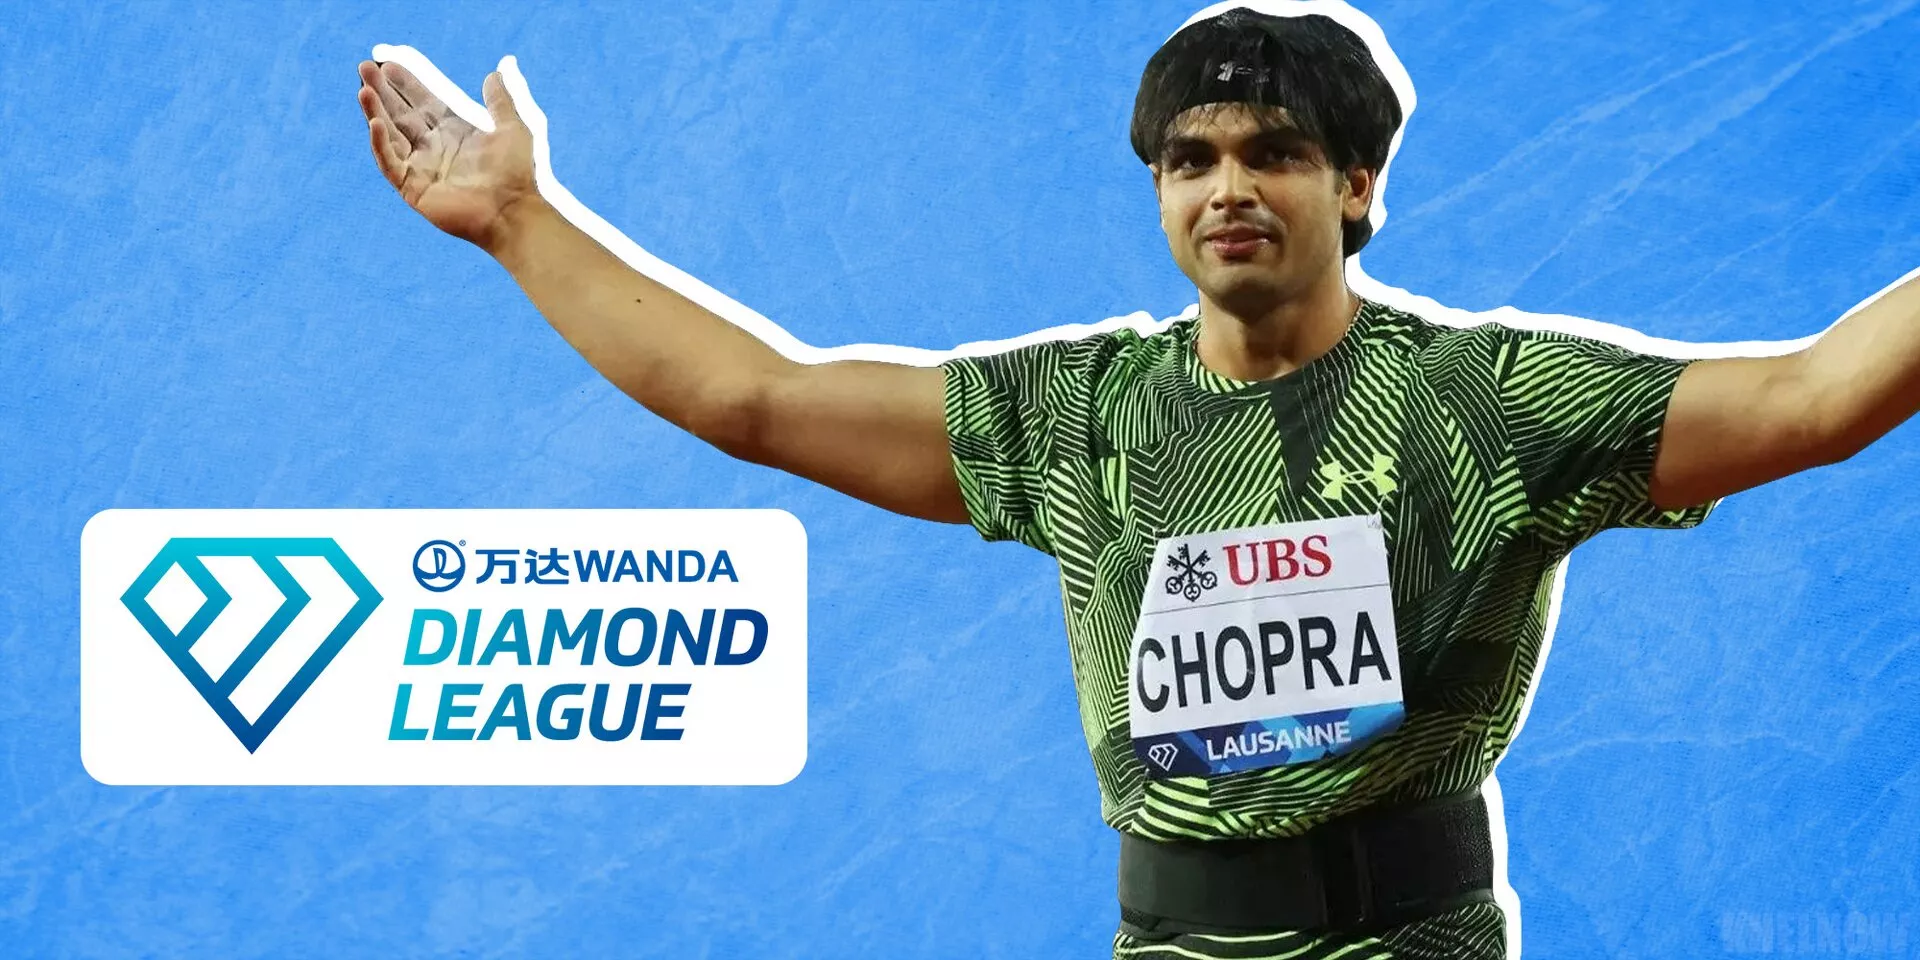 Diamond League 2023 Final Full schedule, fixtures, results, live streaming details